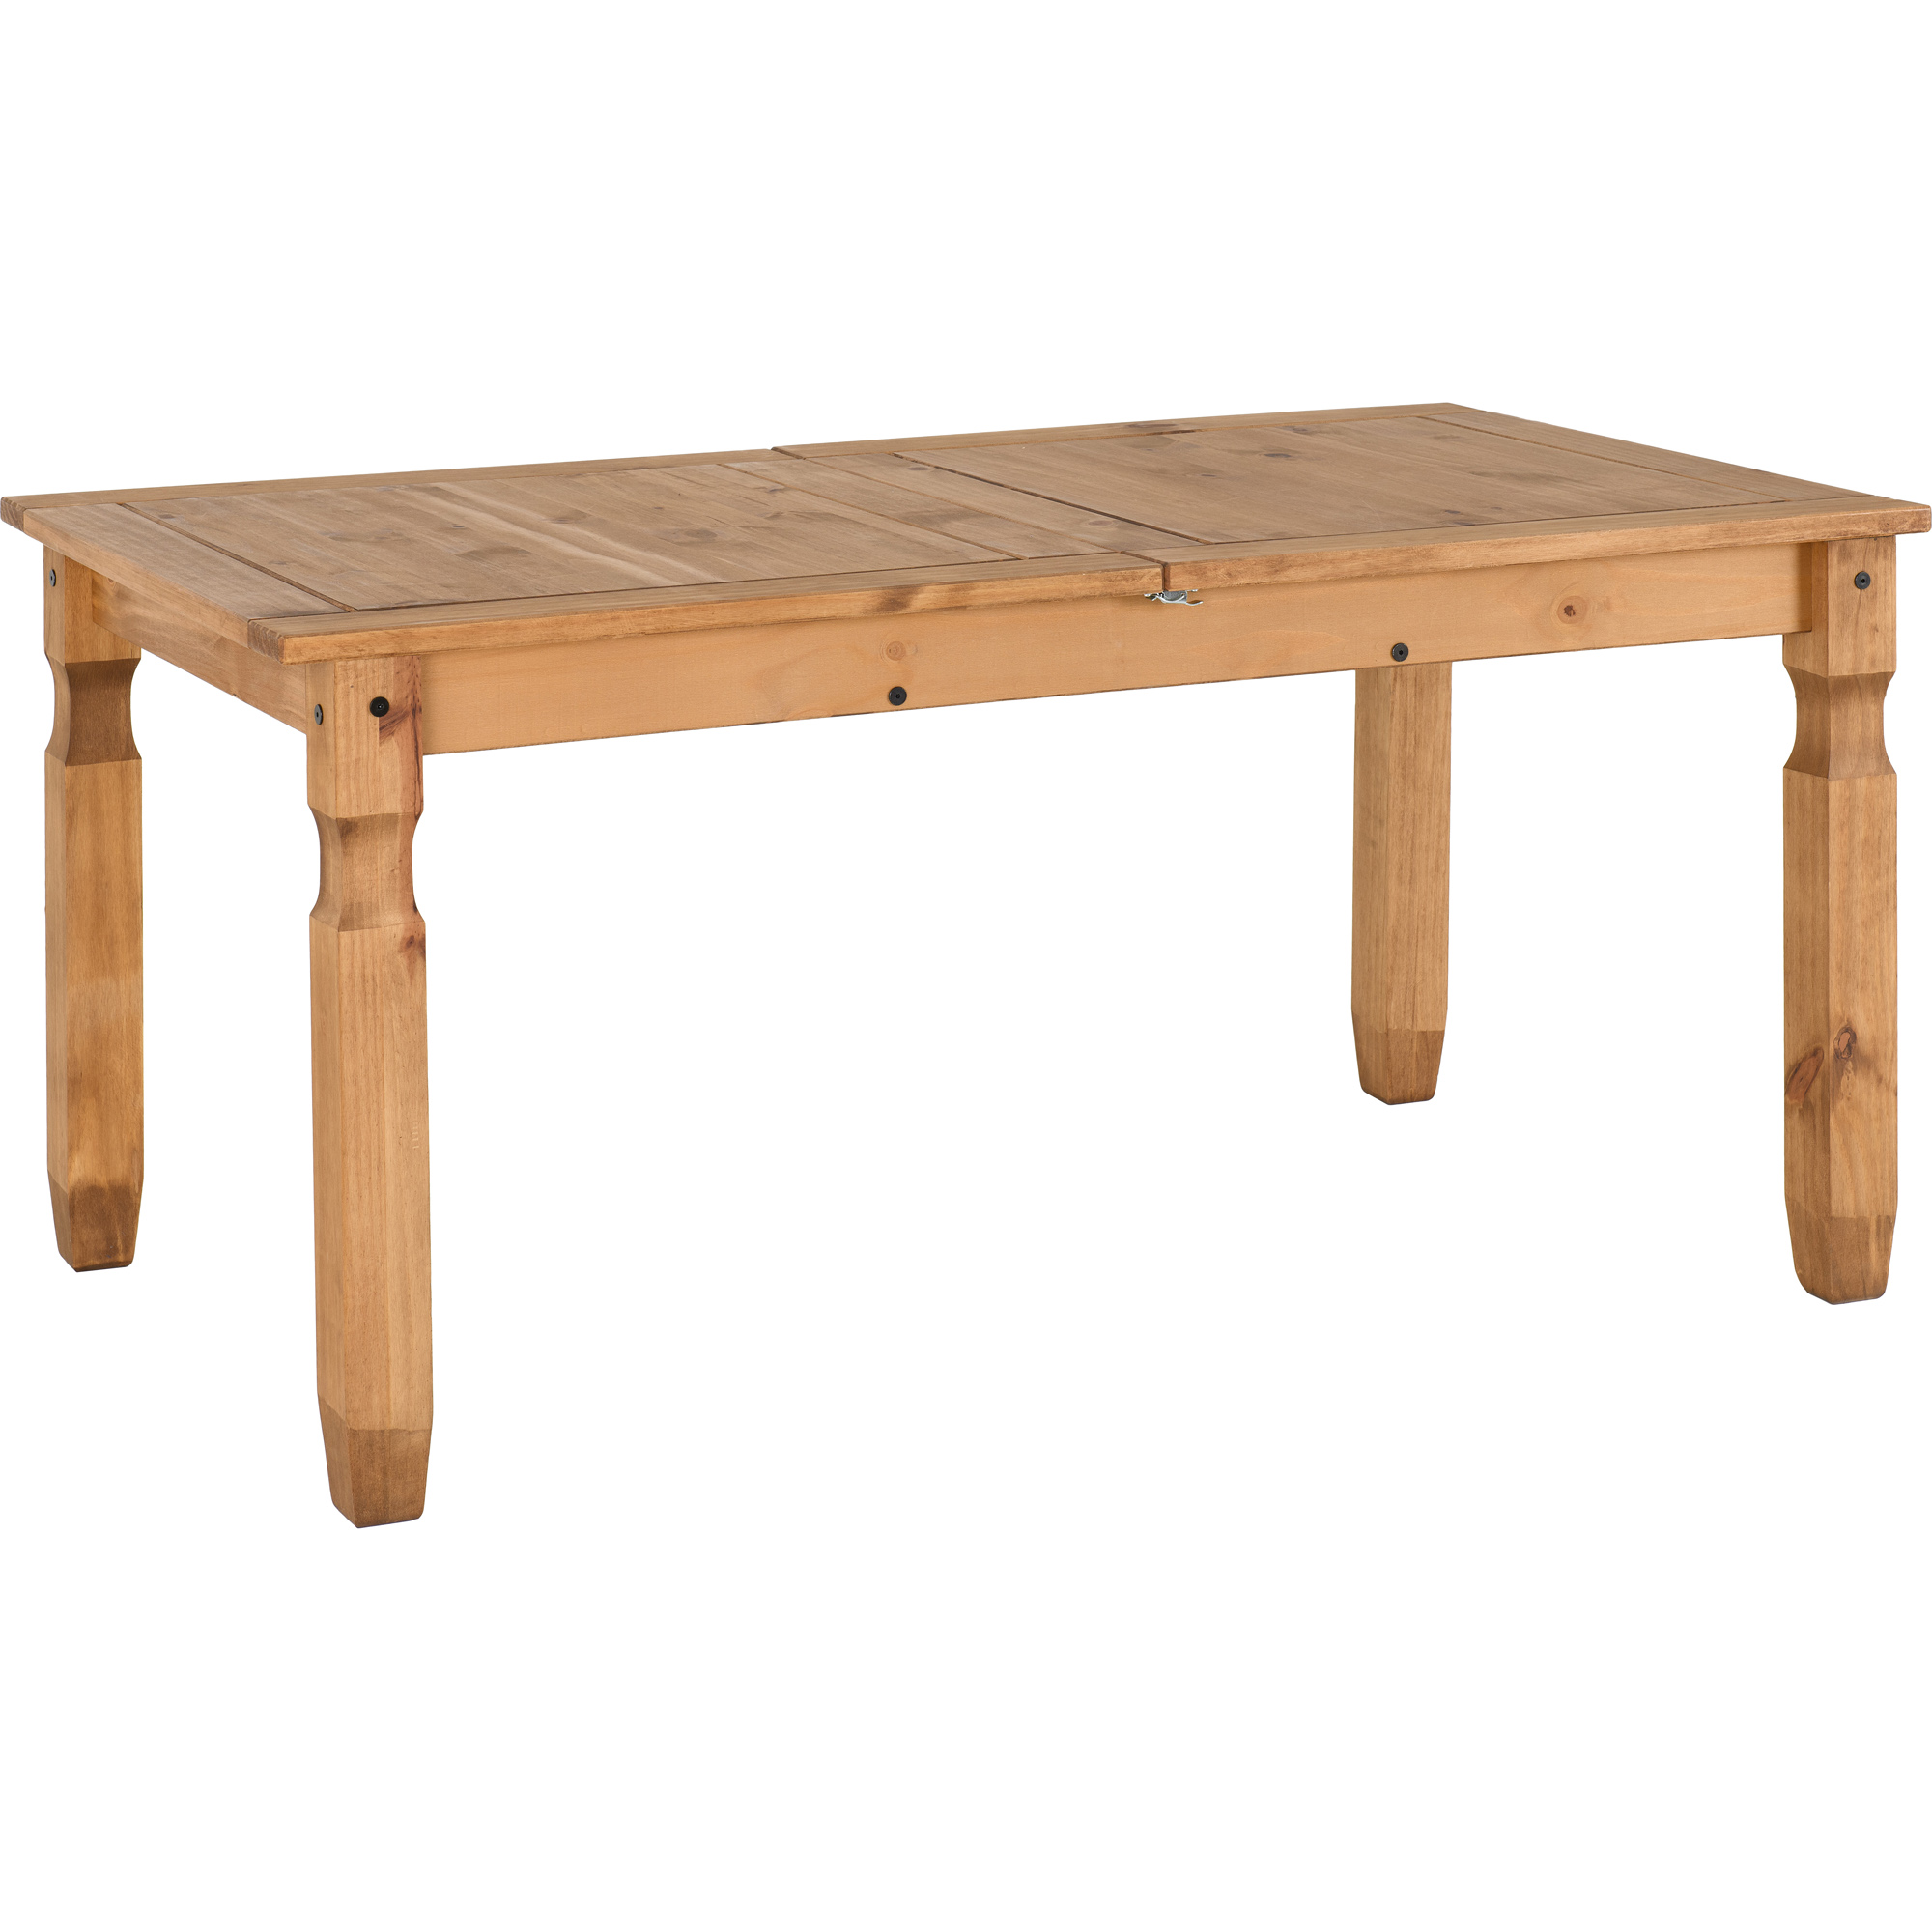 Seconique Corona Extending Dining Table Distressed Waxed Pine Image 2